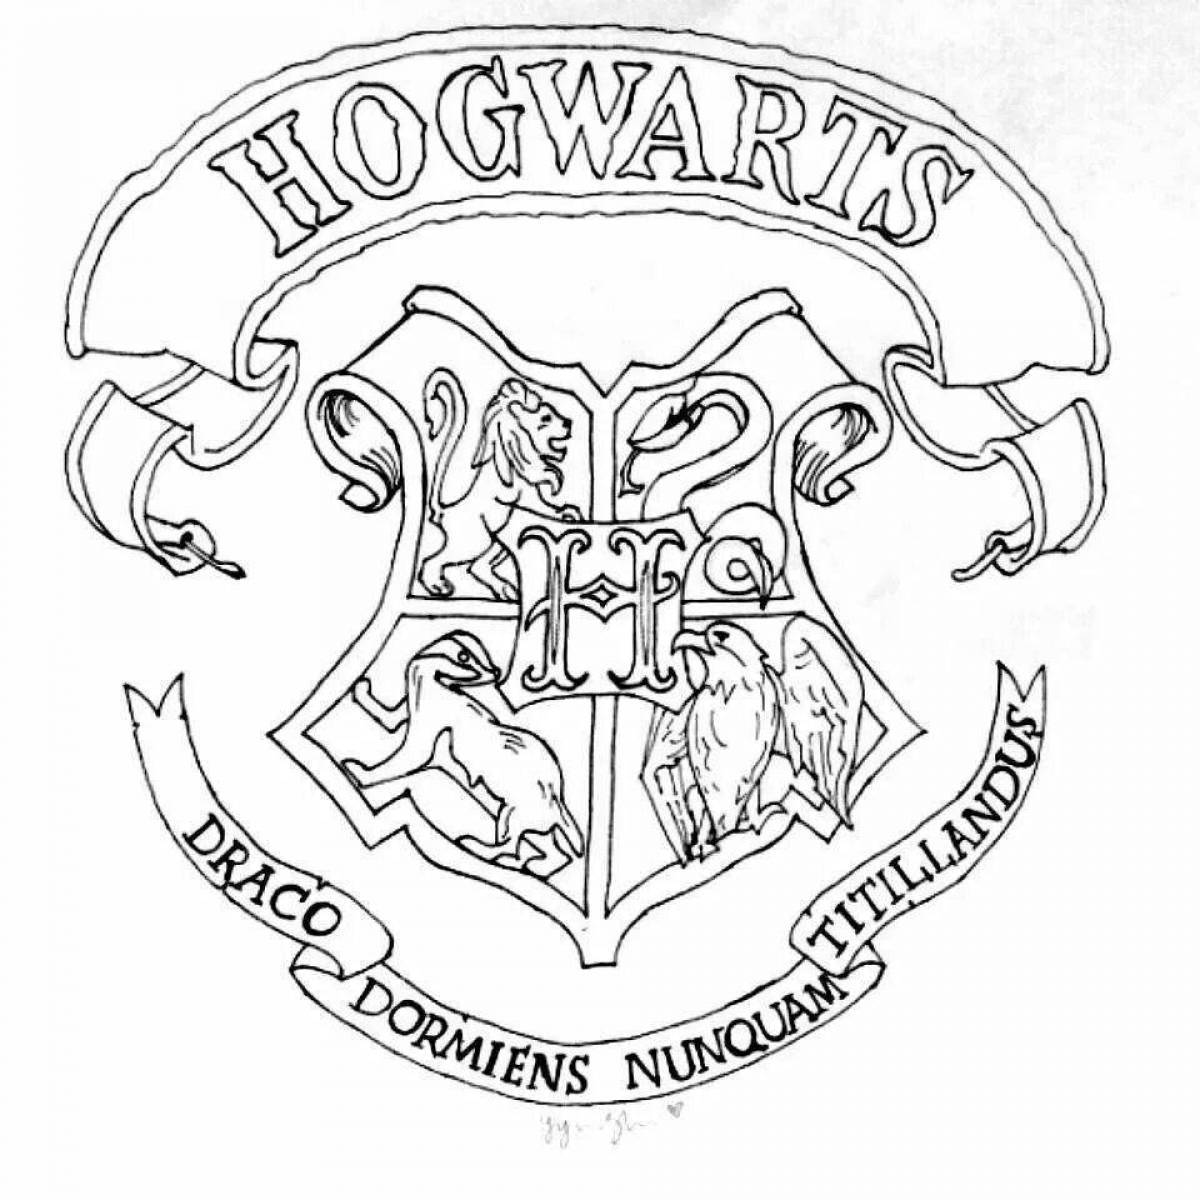 Exquisite school of witchcraft and wizardry coloring book for harry potter fans